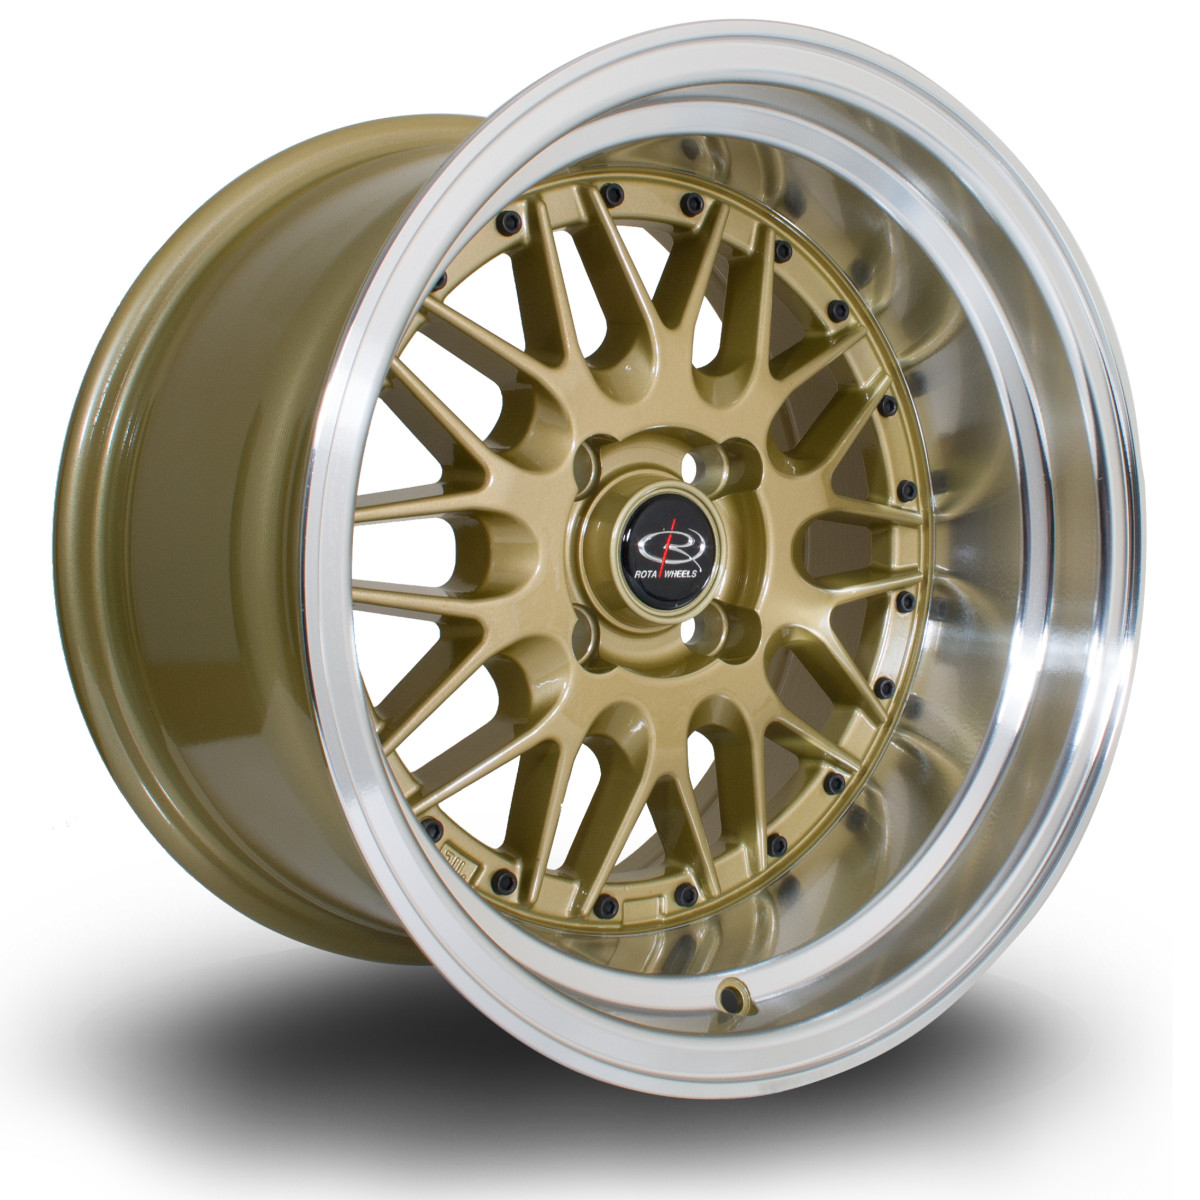 Kensei 15x9 4x100 ET0 Tommy Gold with Polished Lip